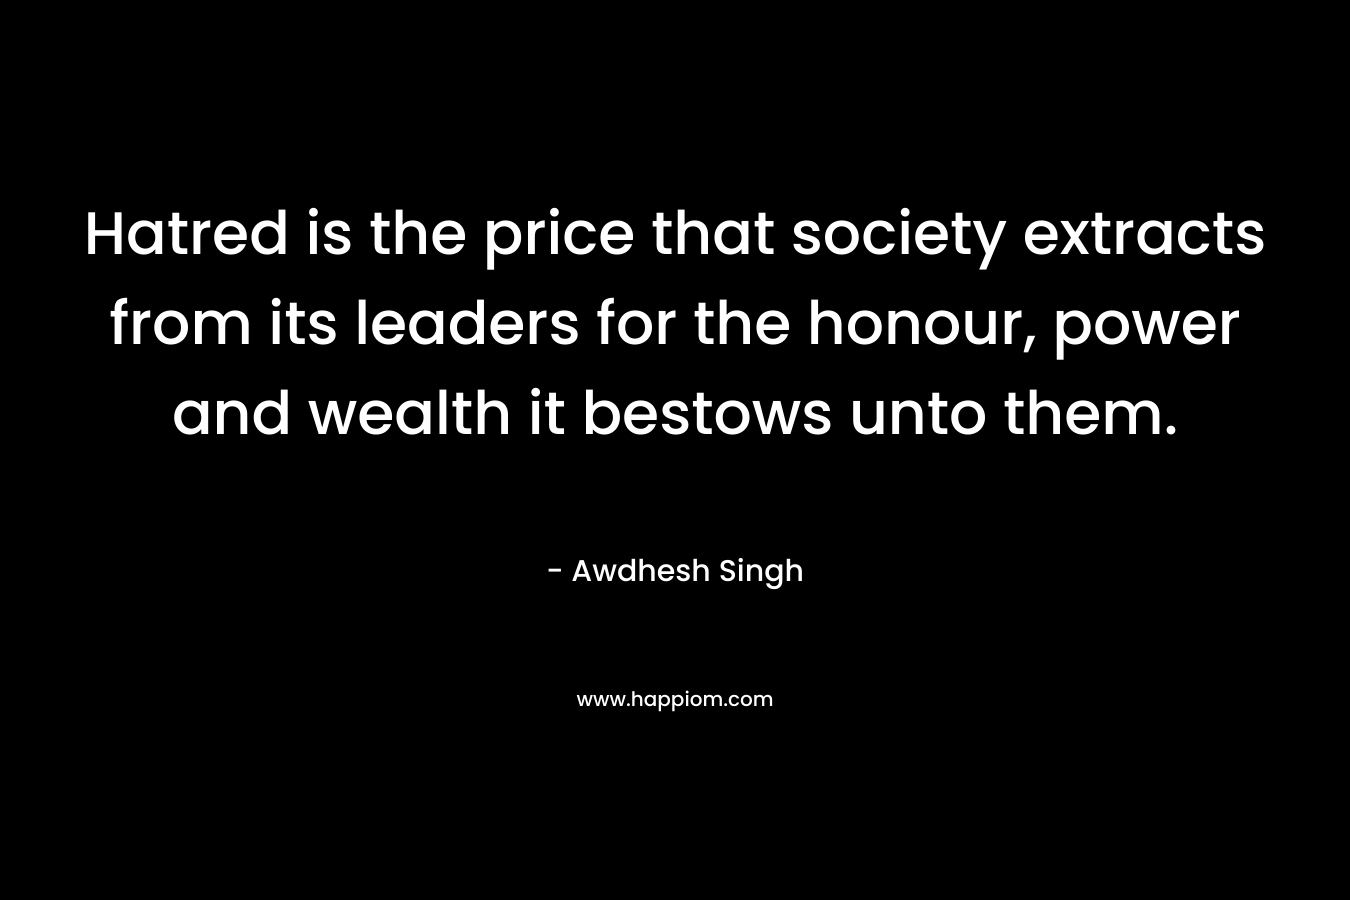 Hatred is the price that society extracts from its leaders for the honour, power and wealth it bestows unto them. – Awdhesh Singh